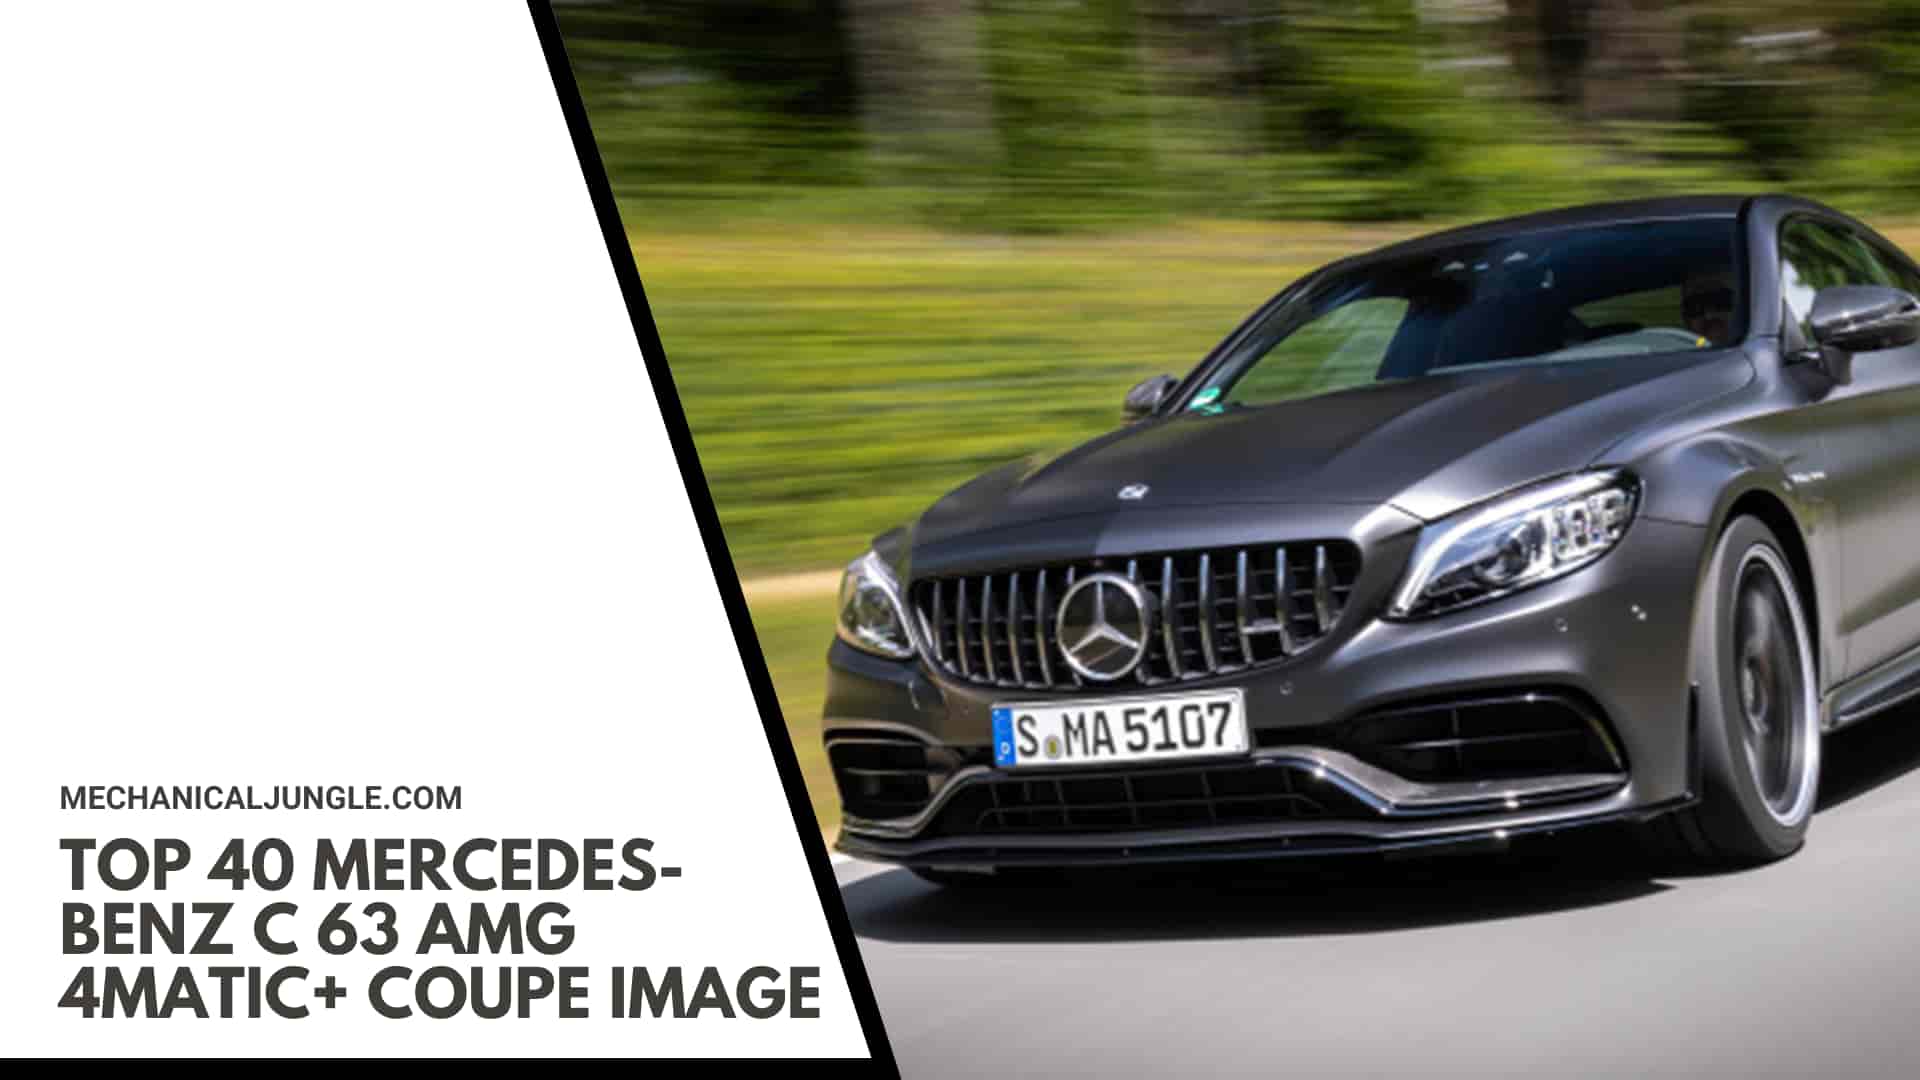 Top 40 Mercedes-Benz C 63 AMG 4MATIC+ Coupe Image